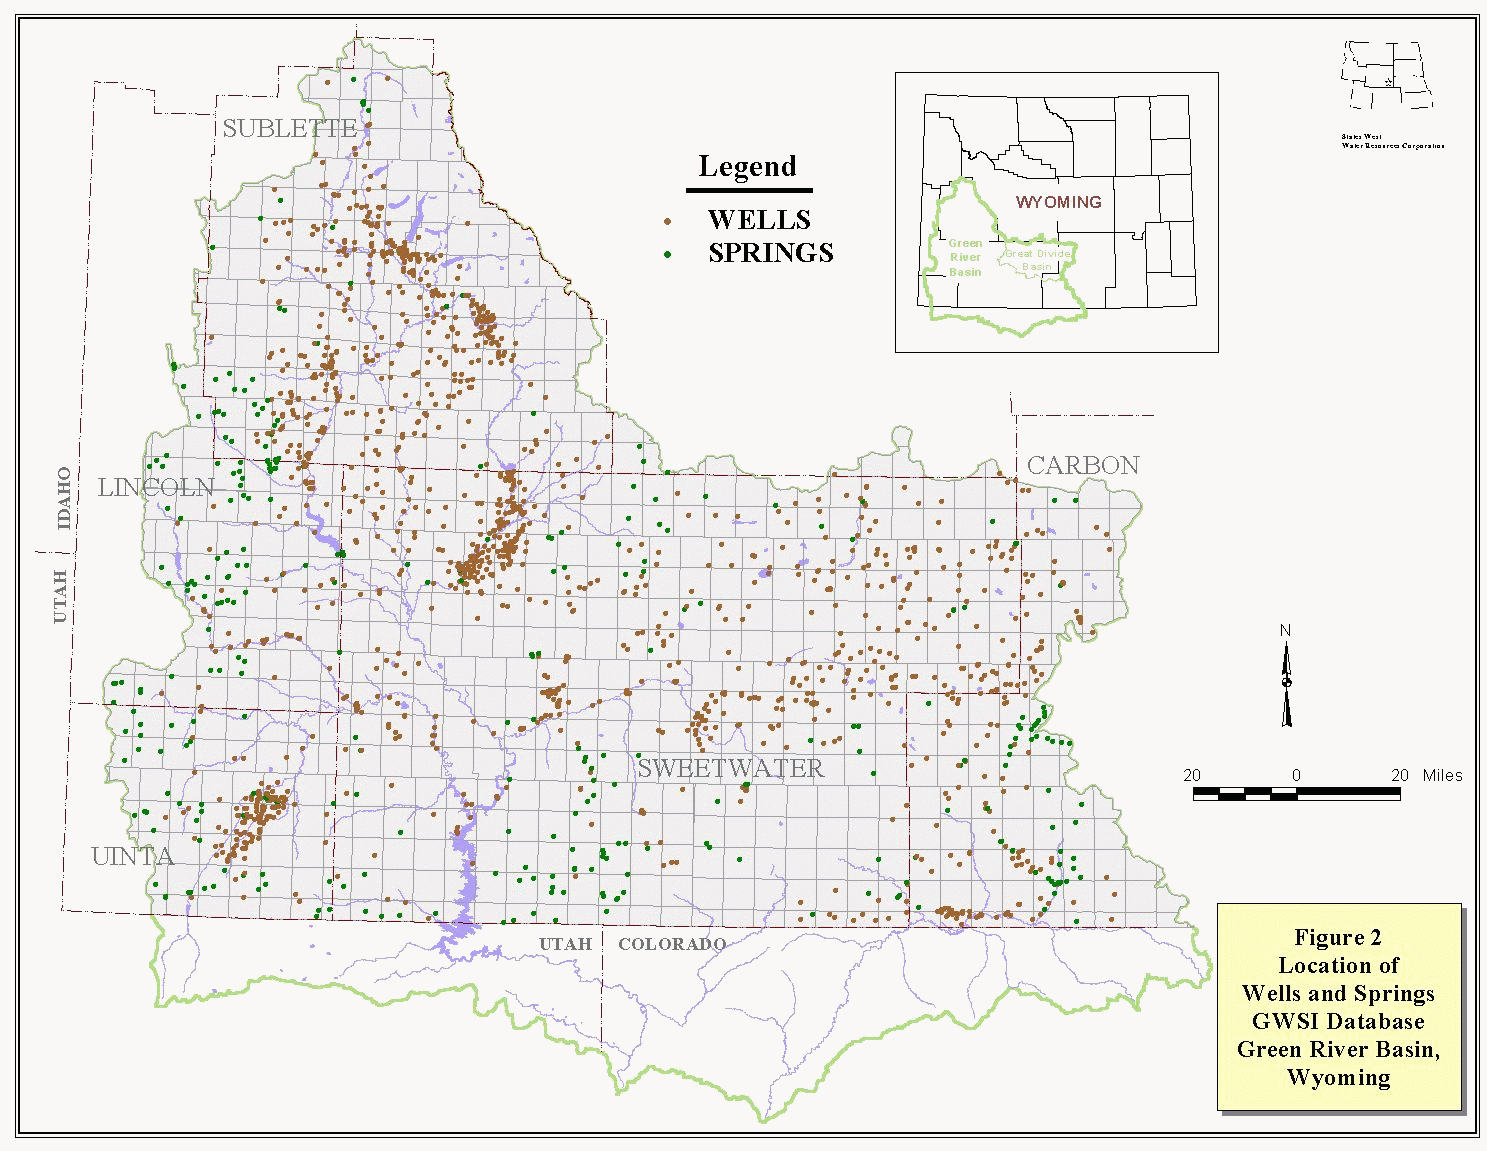 Location of Wells and Springs GWSI Database, 
Green River Basin, Wyoming